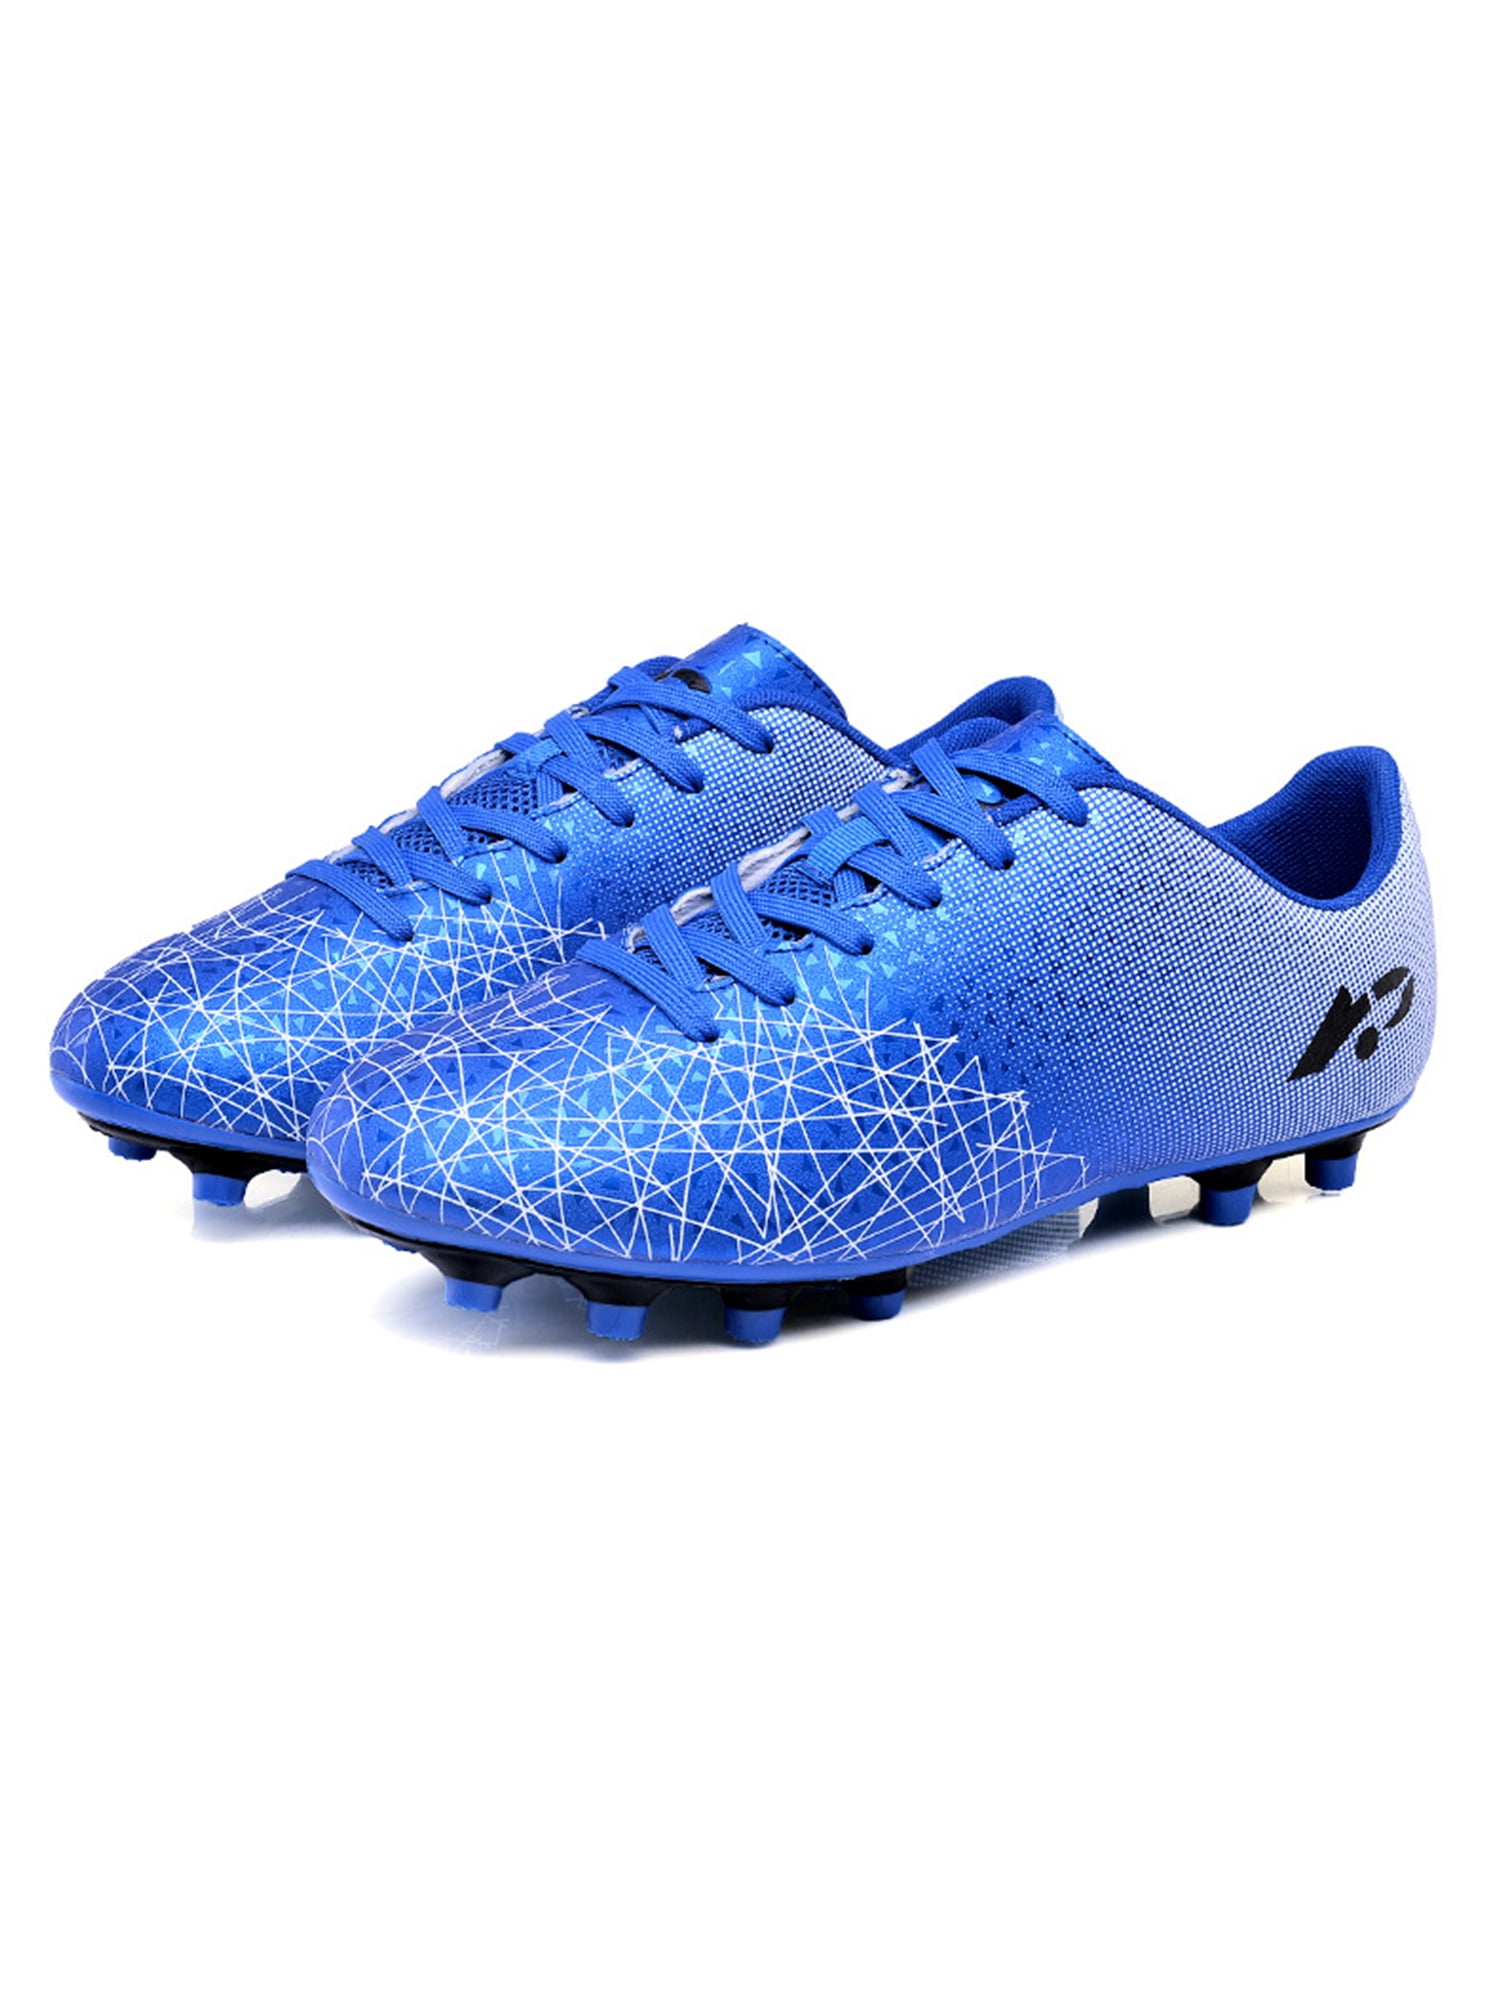 Mens Soccer Shoes Youth Outdoor Football Shoes Firm Ground Soccer Cleats 